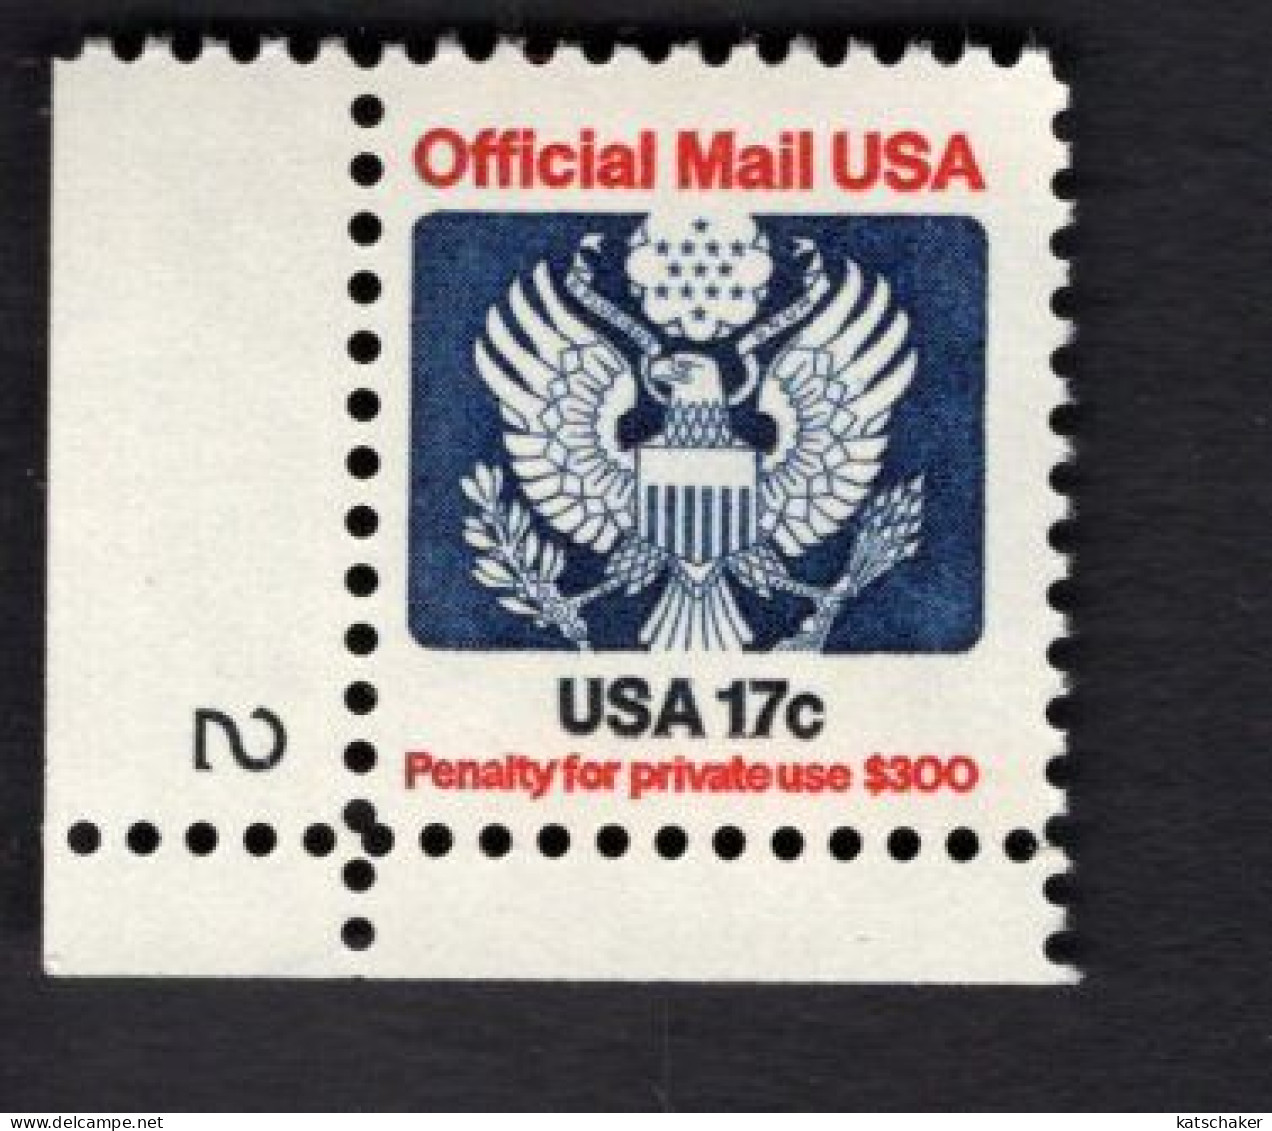 2008954892 1983 SCOTT O130 (XX)  POSTFRIS MINT NEVER HINGED - EAGLE AND SHIELD OFFICIAL MAIL - PLATE NUMBER 2 - Dienstzegels